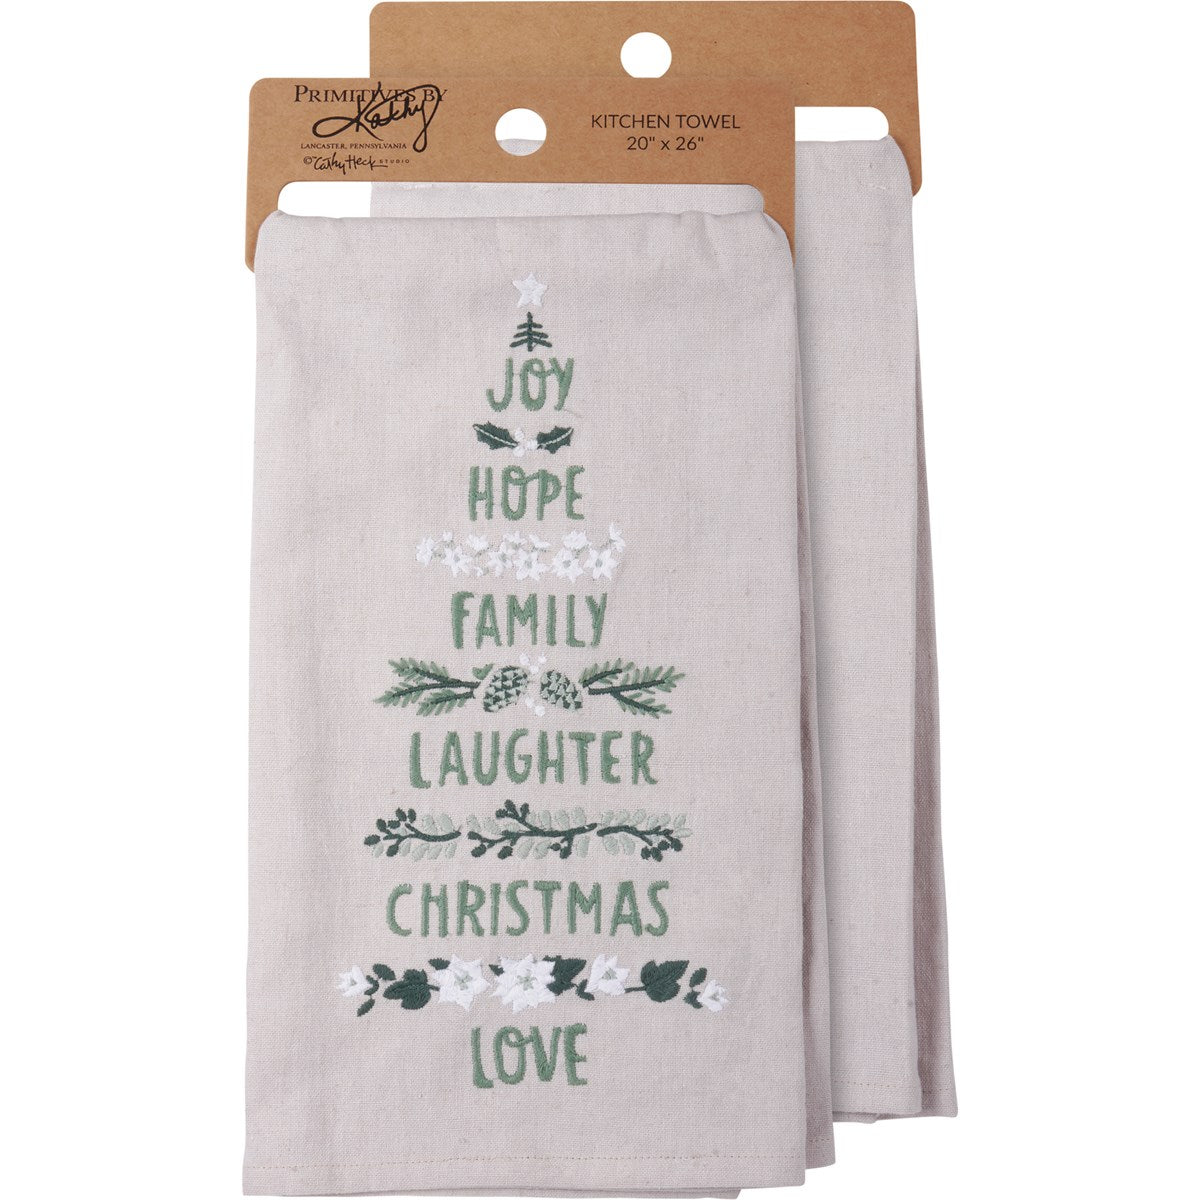 Family Laughter Kitchen Towel